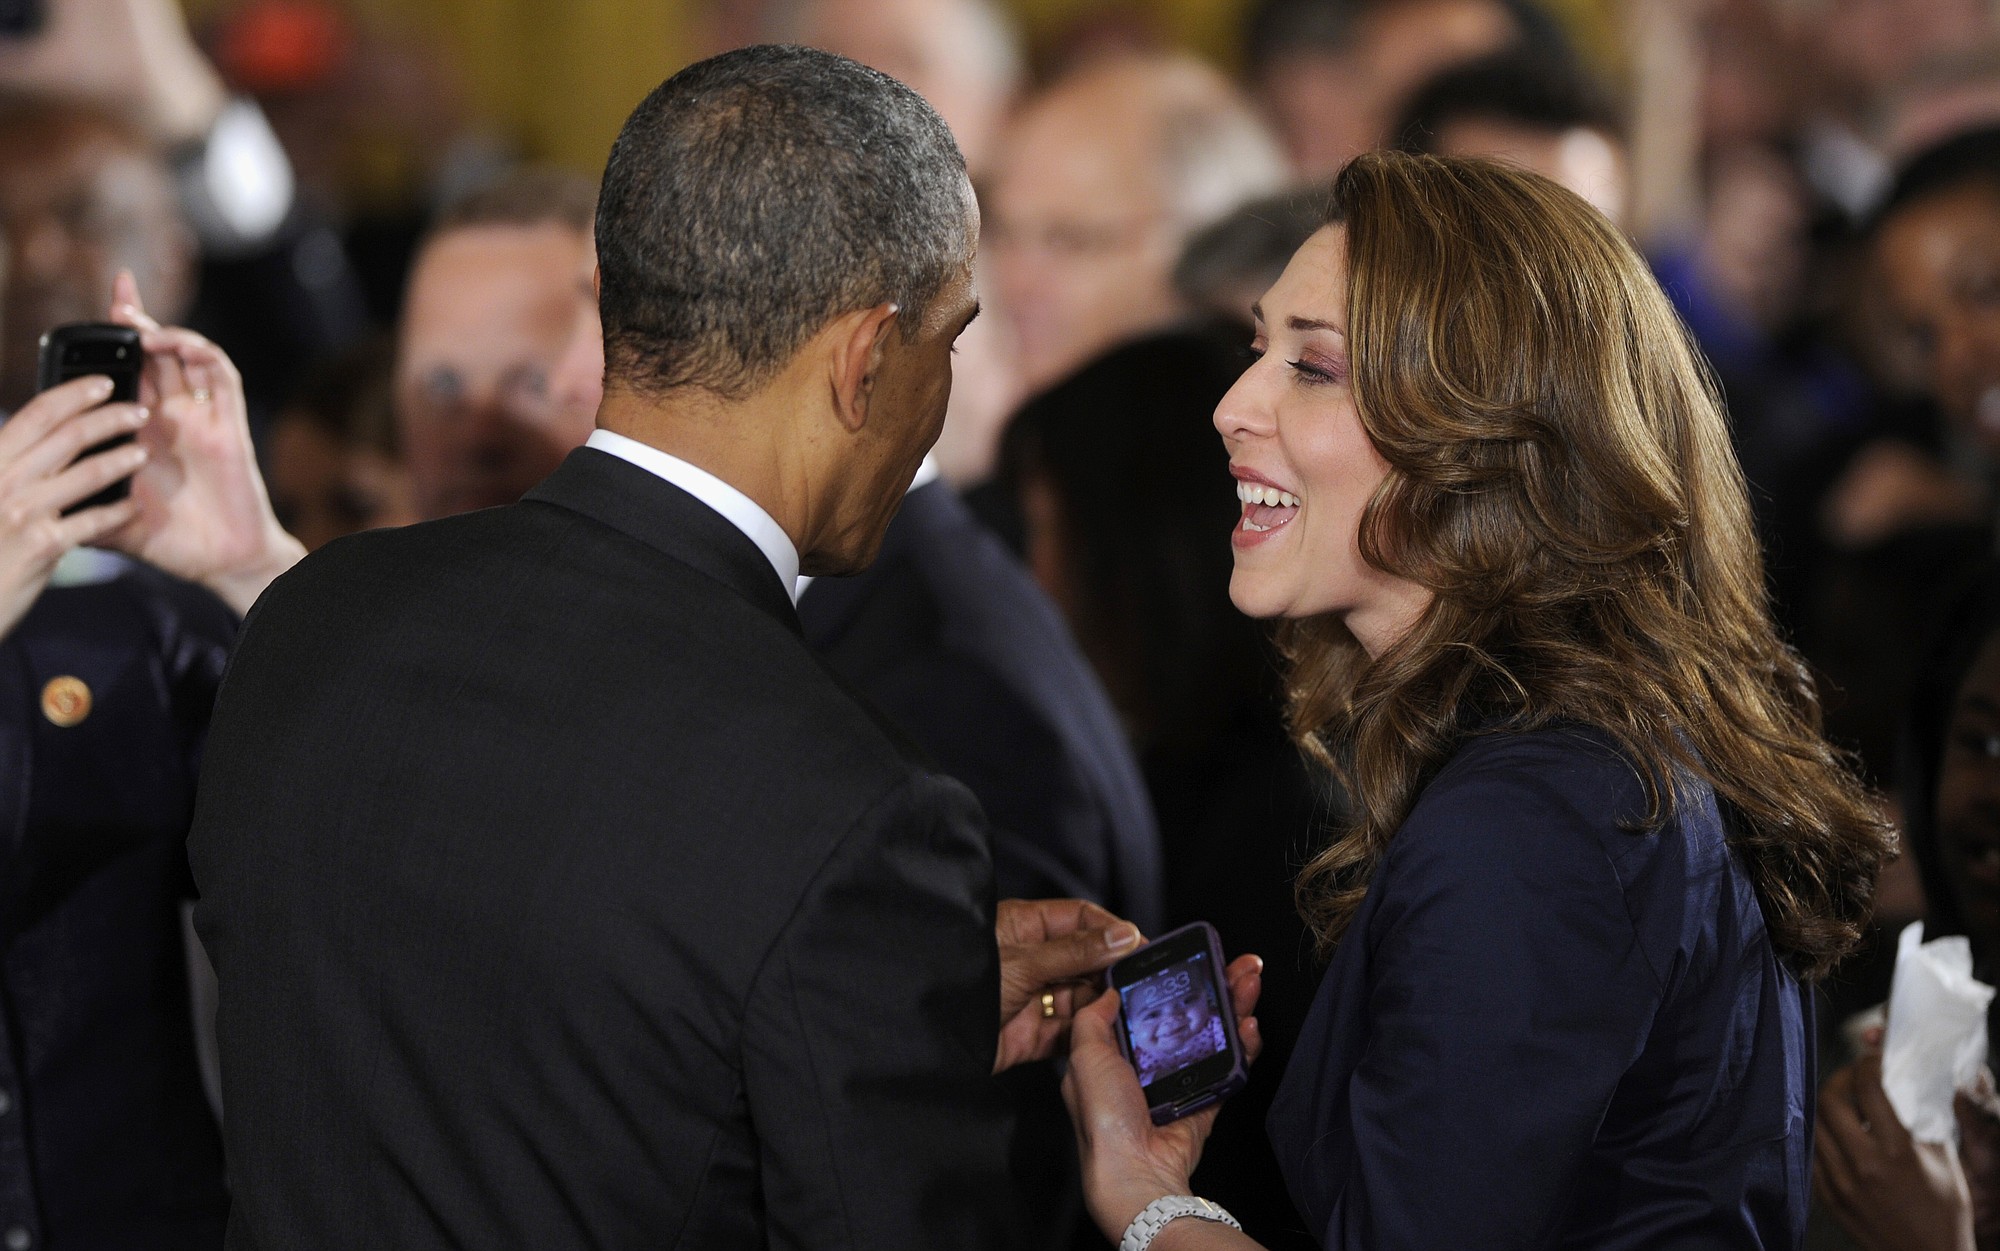 President Barack Obama talks with Rep. Jaime Herrera Beutler on May 21 at the White House after a ceremony where the president honored the Super Bowl champion Seattle Seahawks.